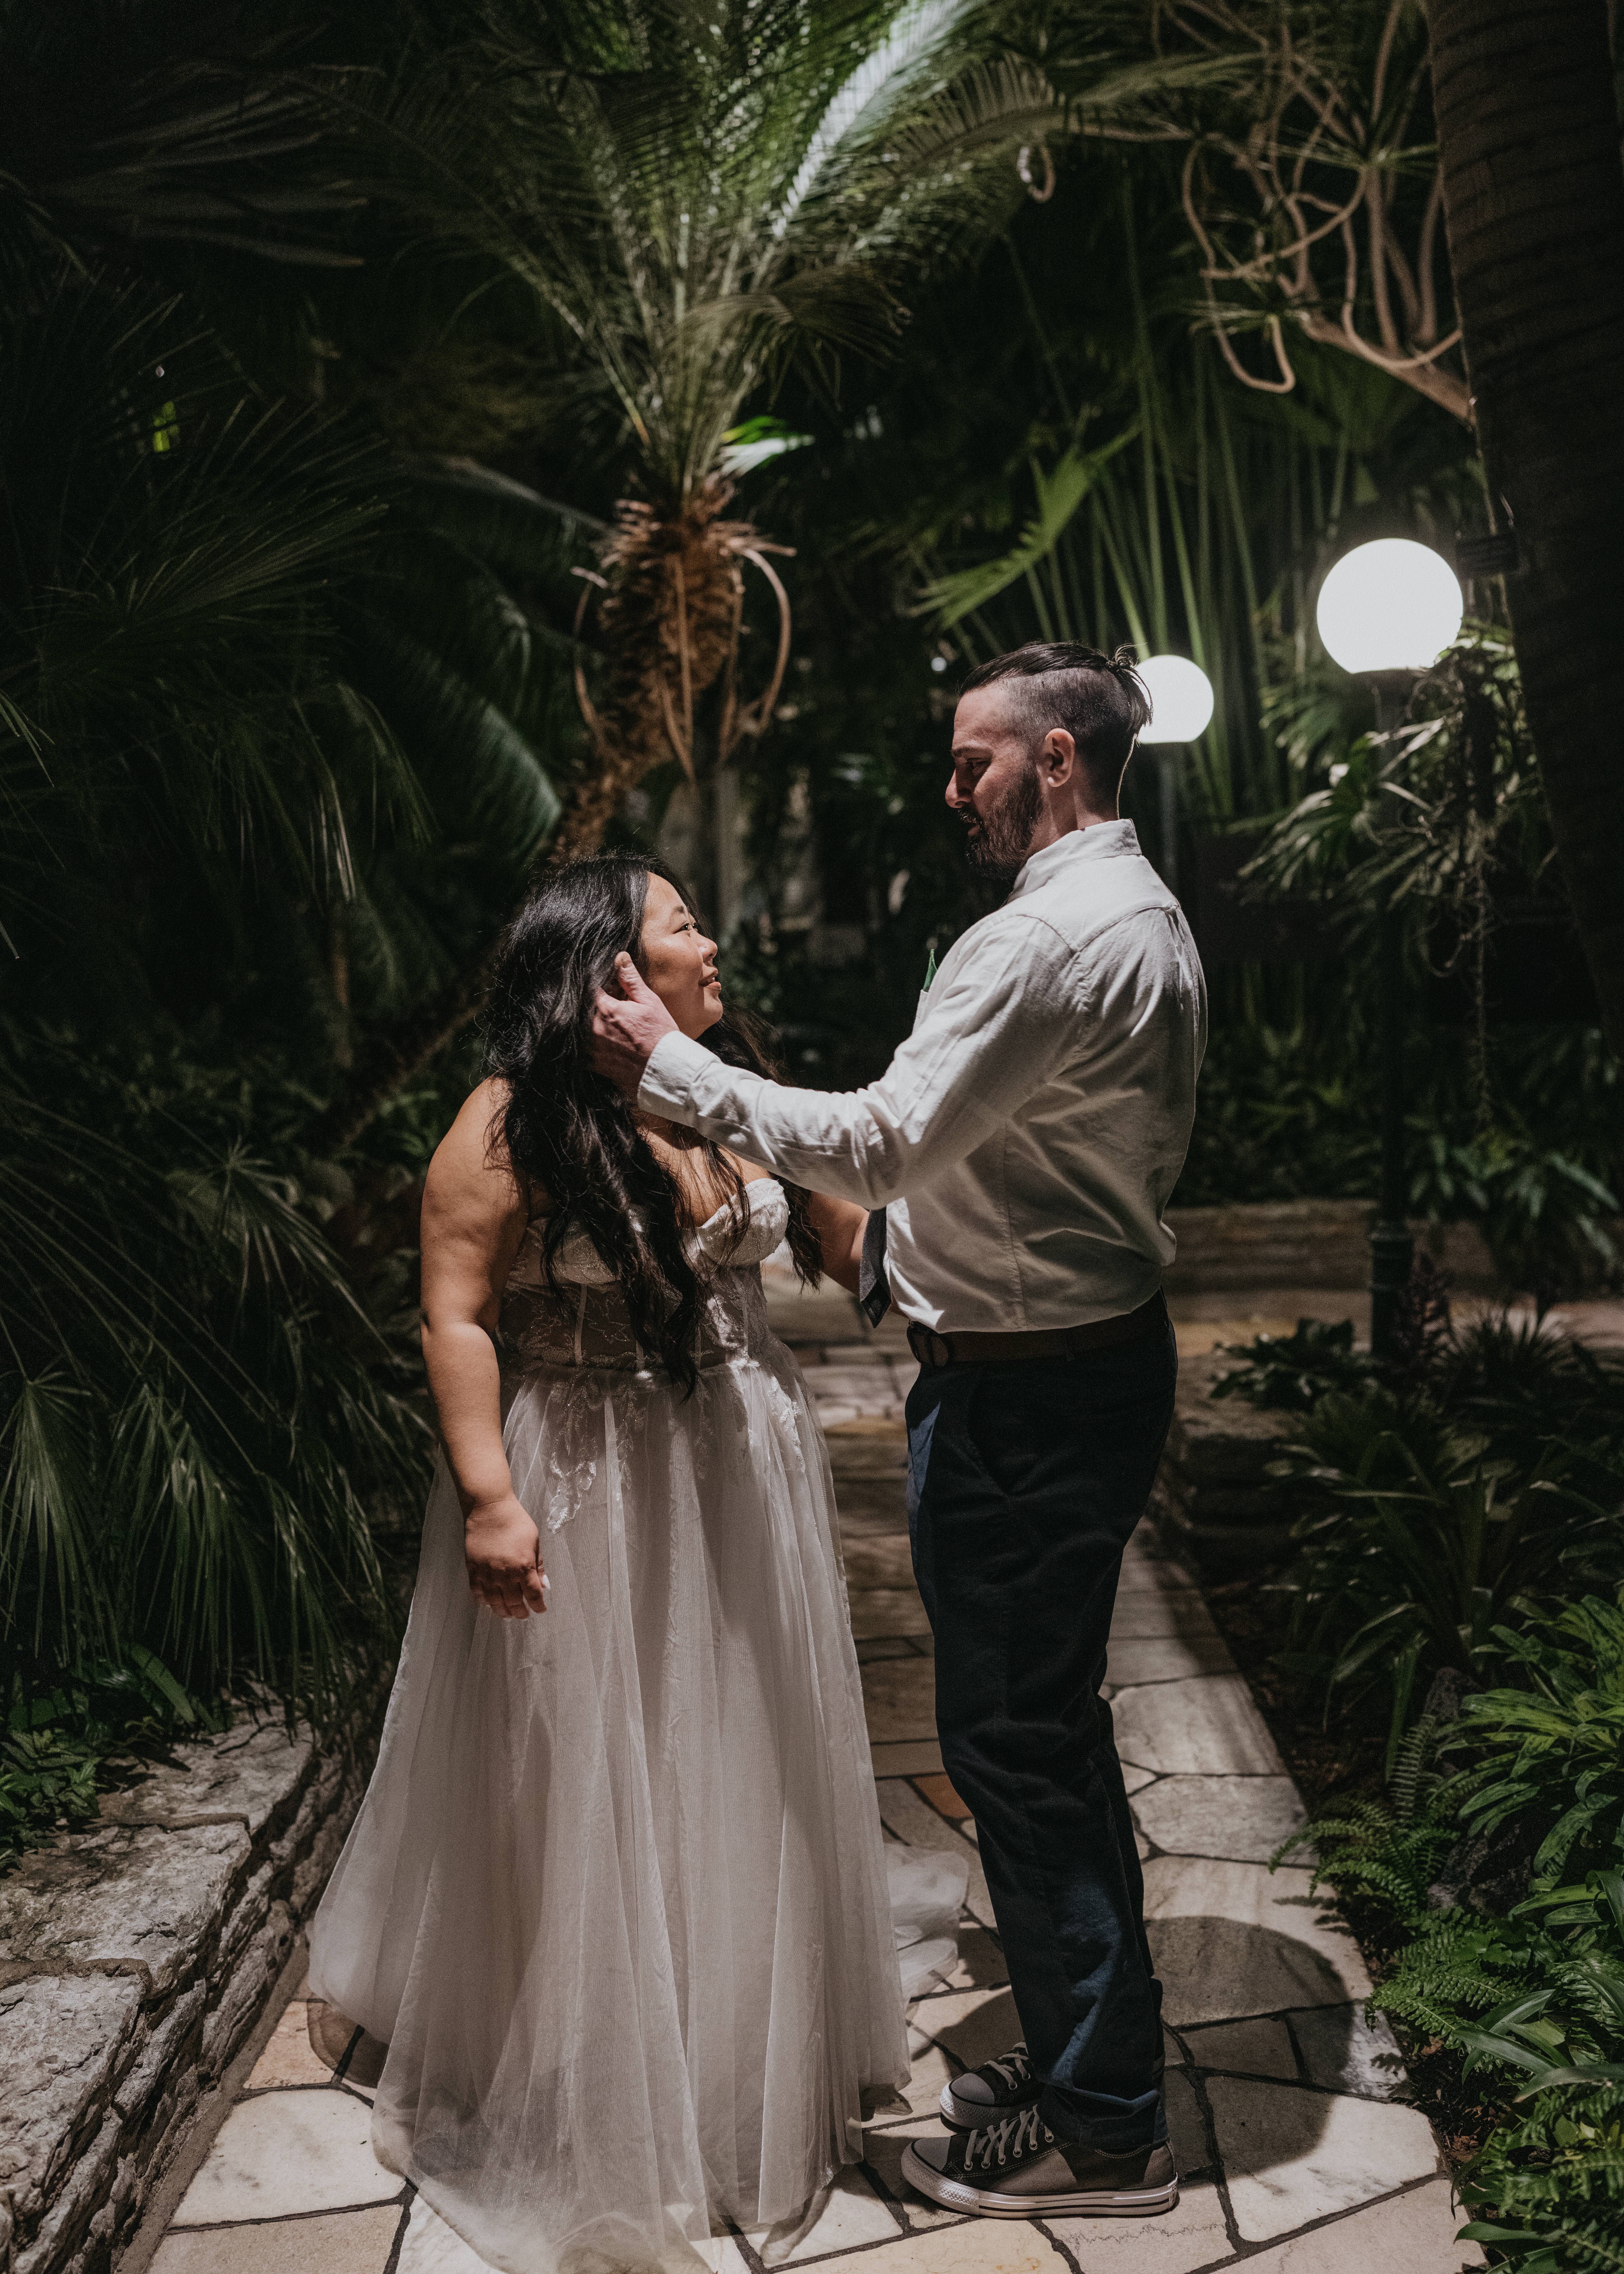 A wedding couple standing underneath palm trees at the Como Conservatory, facing each other and touching each other's faces.